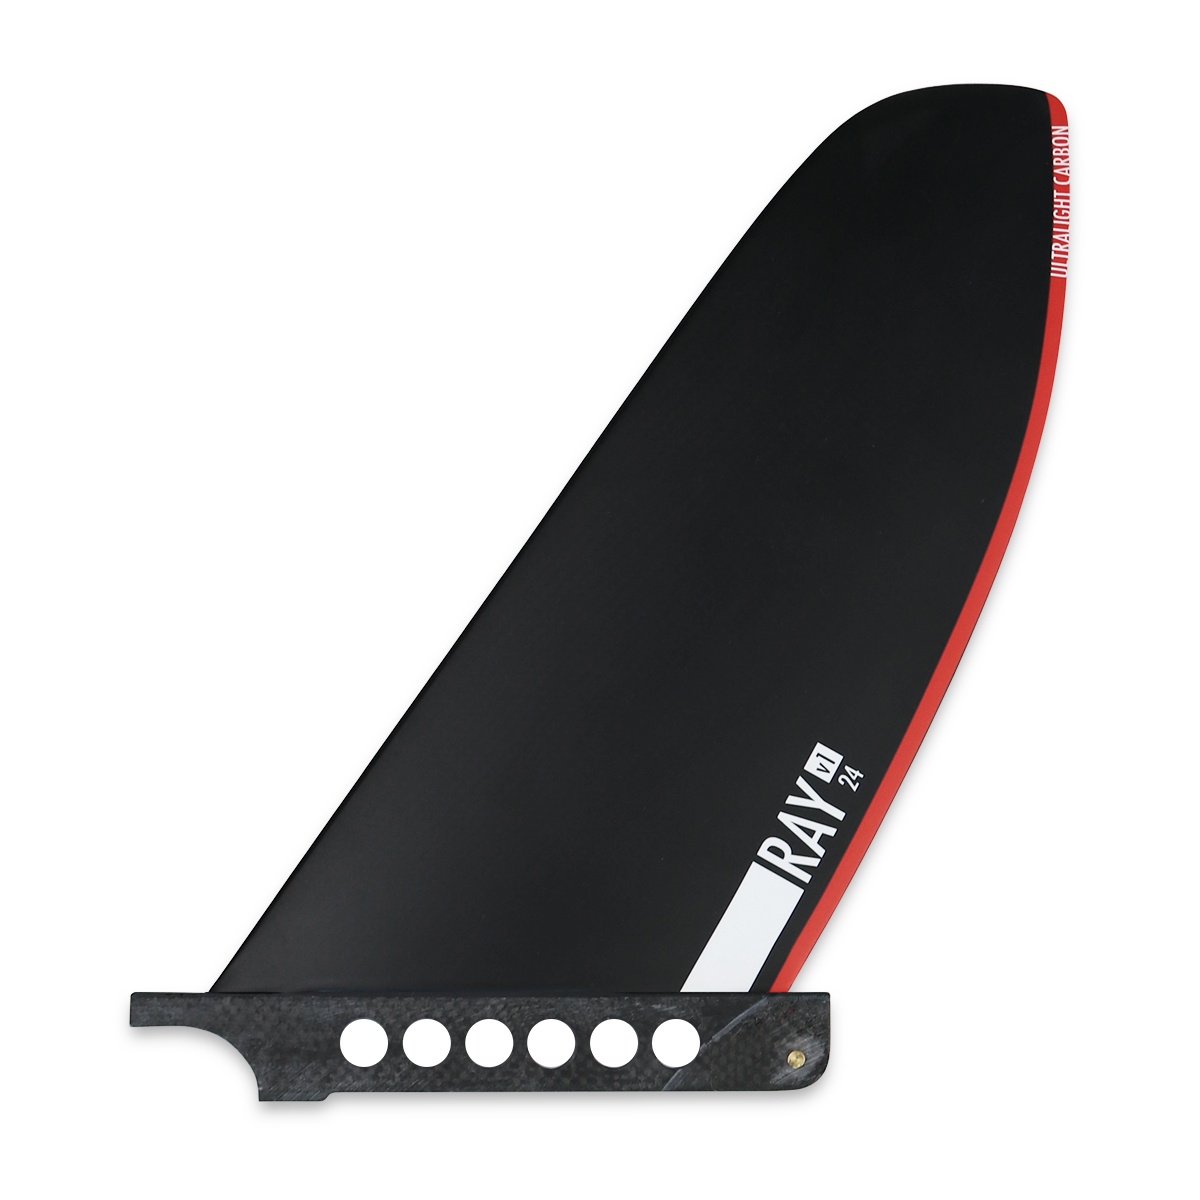 Sup, stand up paddling, Sup race fin, stand up race fin, standup paddle fin, paddle board, paddleboard fin, paddleboard race fin, glide, speed, tracking, stability, carbon, control, lightest sup fin, black project, black project fins, fin for starboard Allstar, Starboard Sprint, Starboard Ace, SIC RS, Naish, Infinity. Ray, Ray fin, tracking, increased tracking, most tracking, stability, increase stability narrow board, speed, efficient.